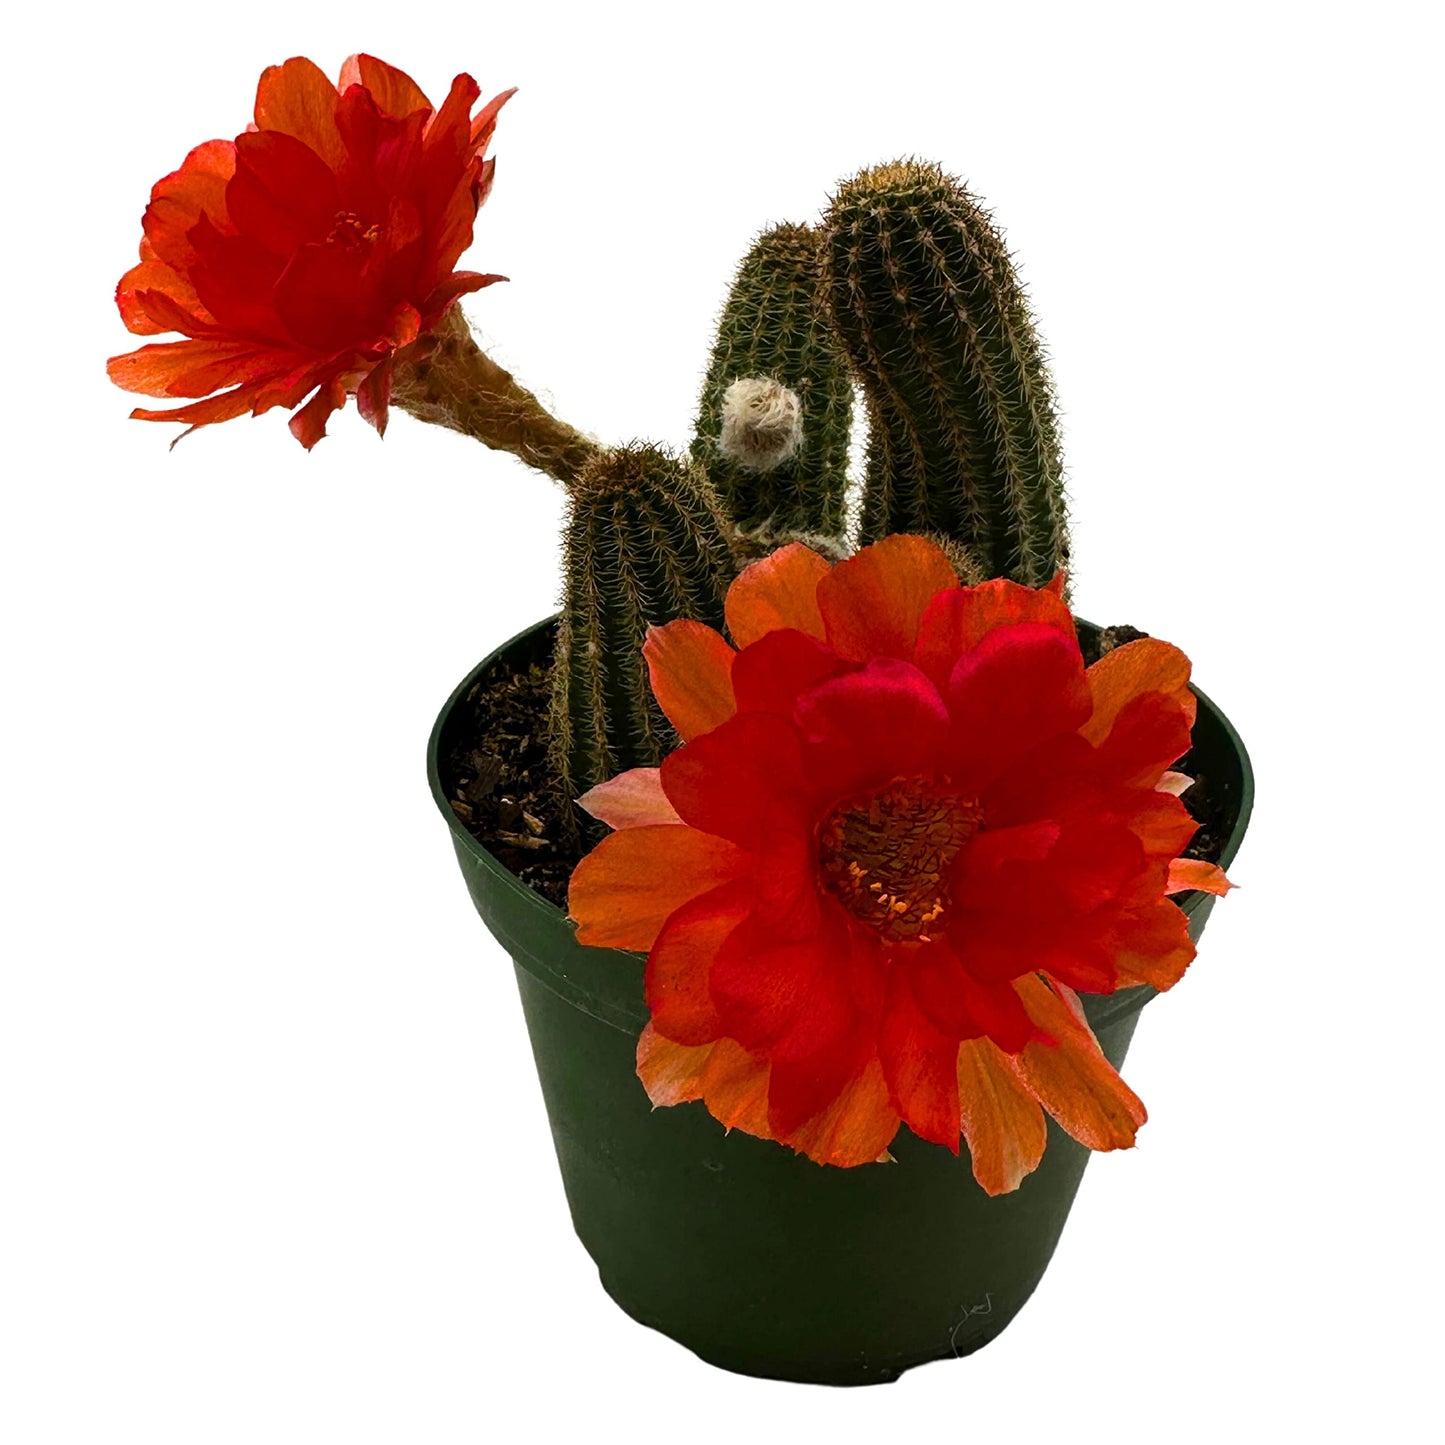 Peanut Cactus, Echinopsis chamaecereus, Beautiful Healthy Well Rooted Starter Plant in 4 inch Pot